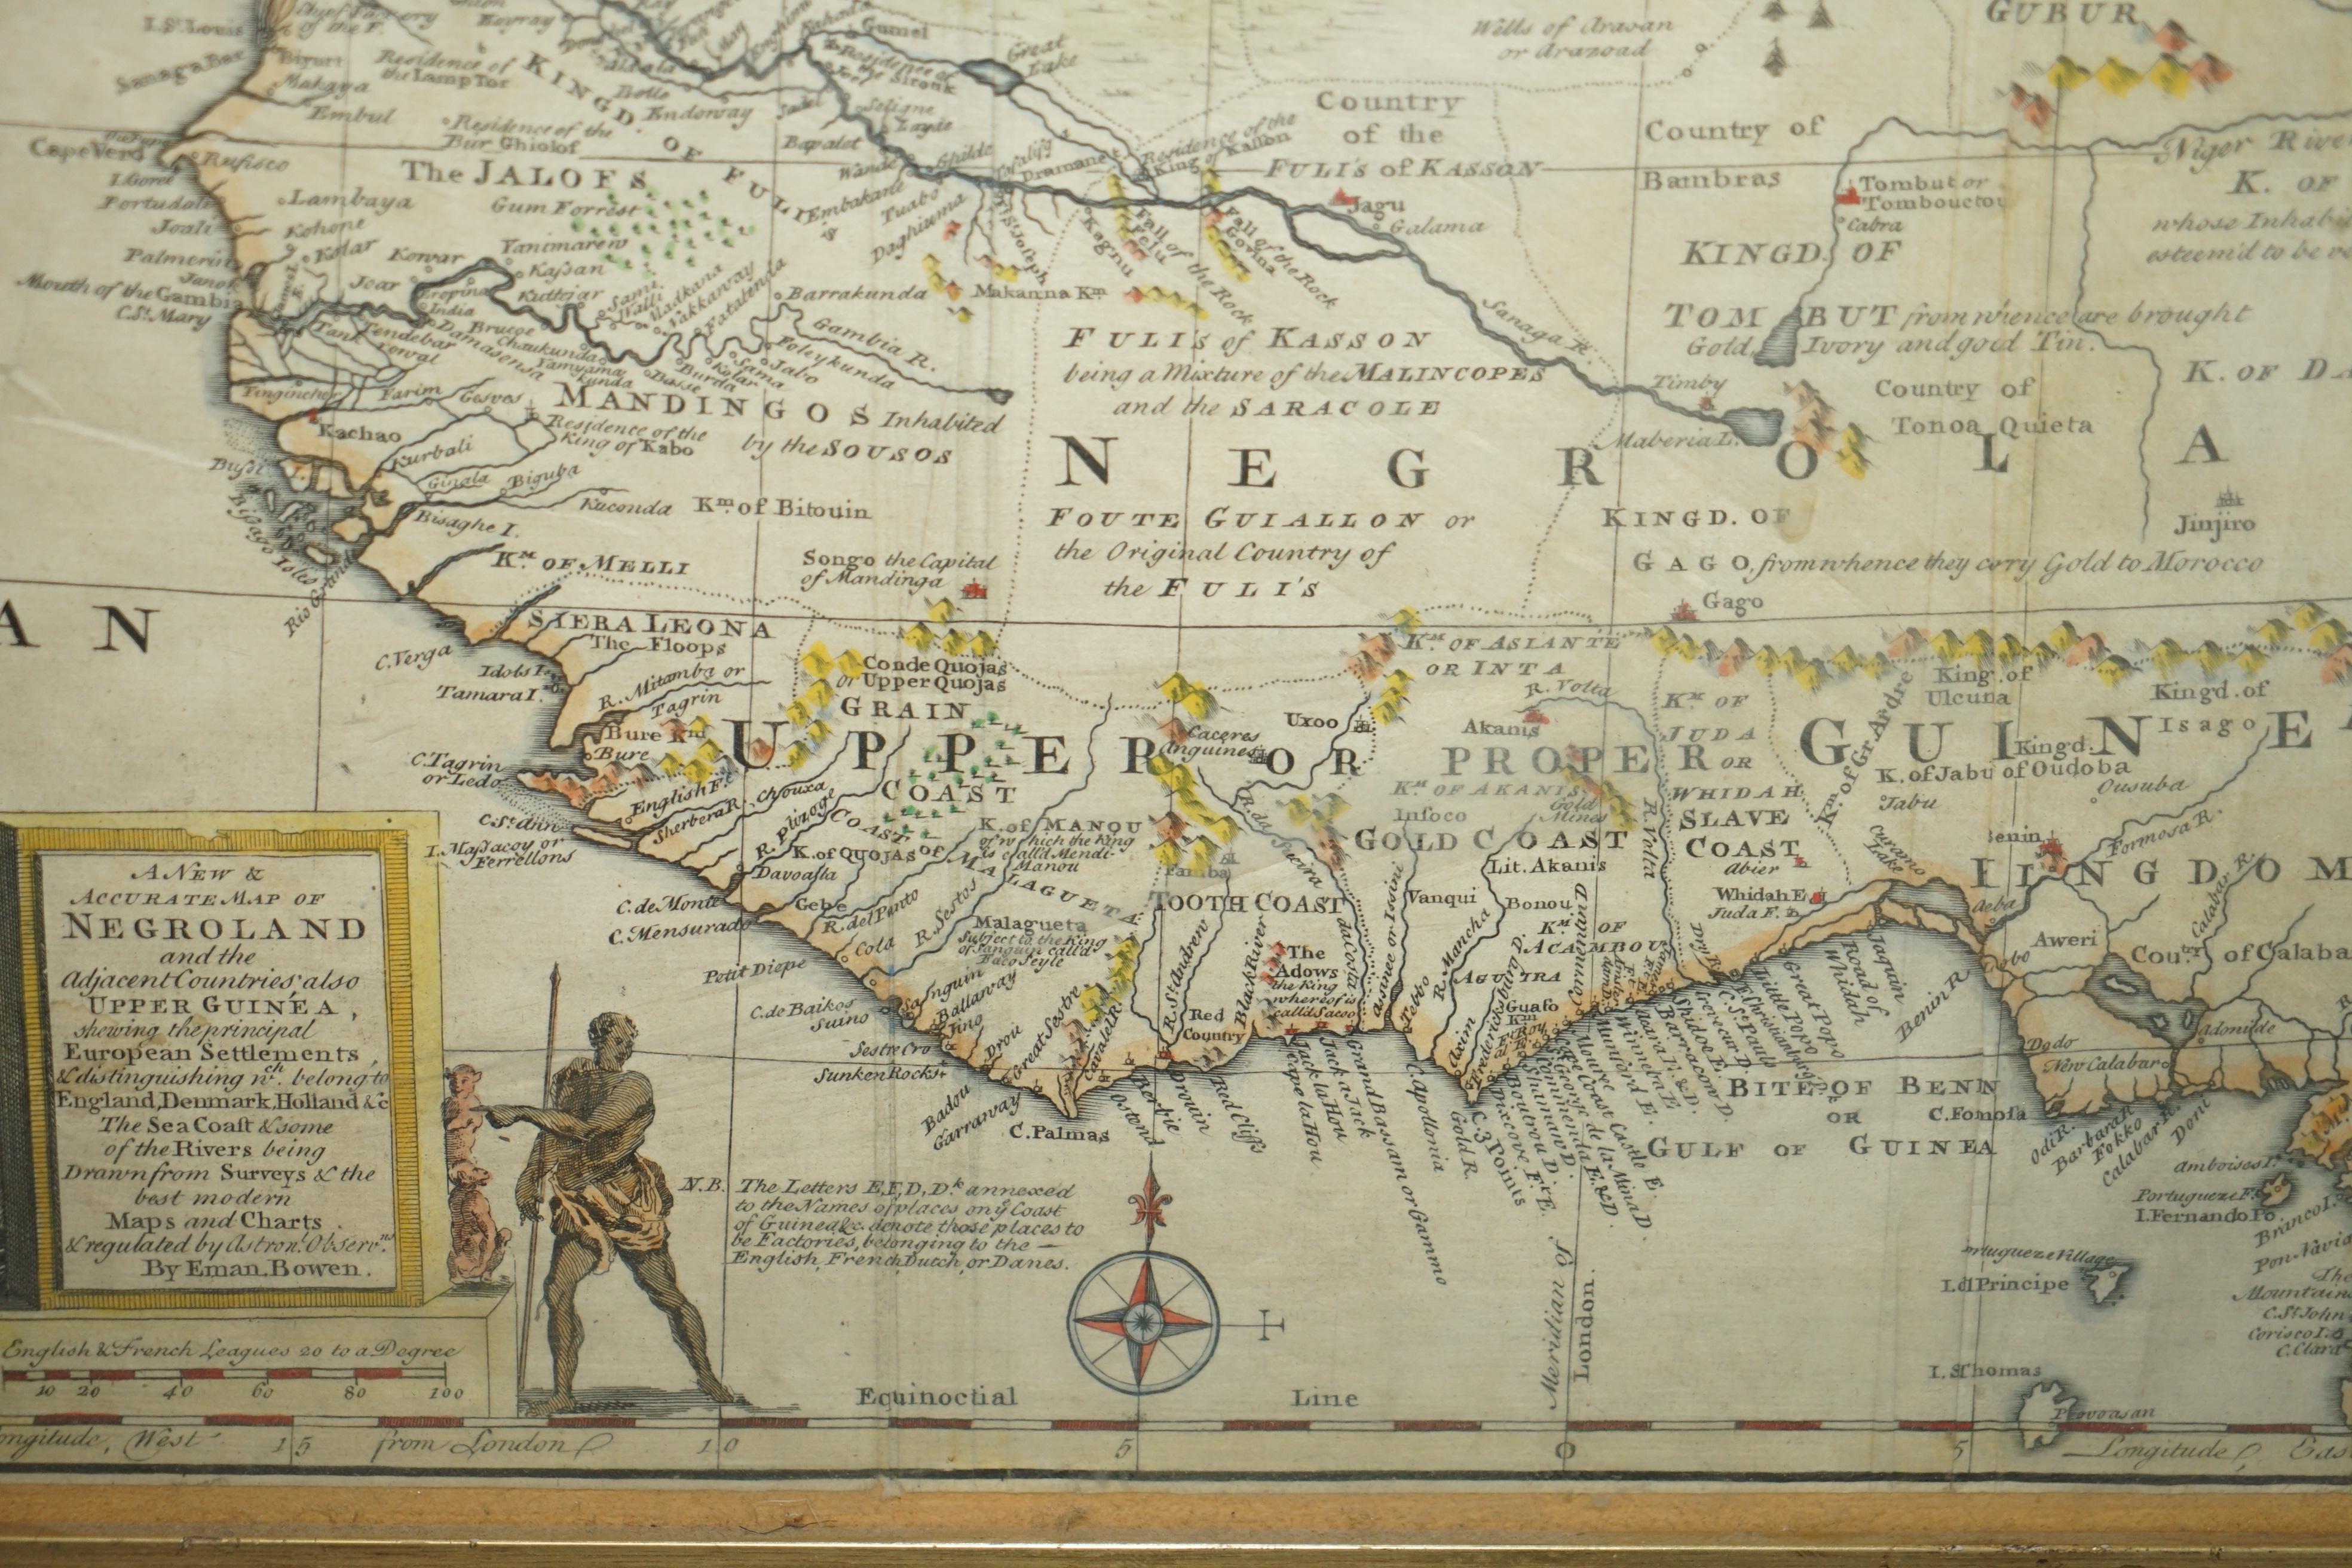 1747 British Map Showing the Kingdom of Judah on the West Coast of Africa 1